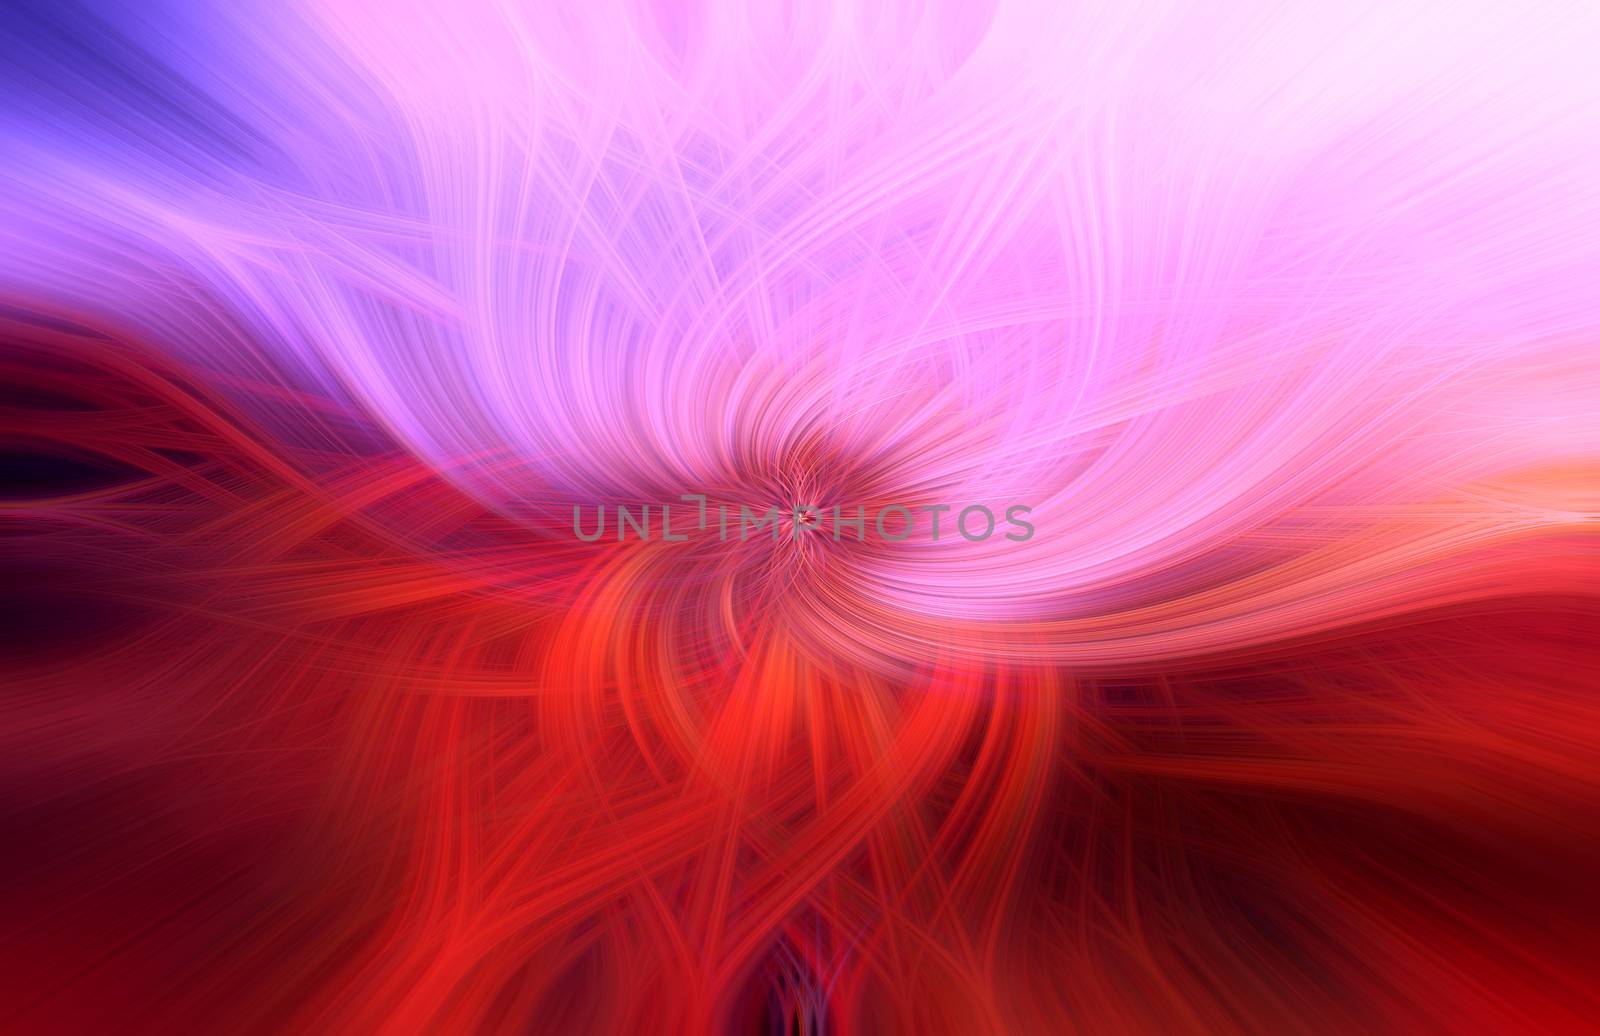 Beautiful abstract intertwined 3d fibers forming an ornament out of various symmetrical shapes. Purple, pink, red colors. Illustration.